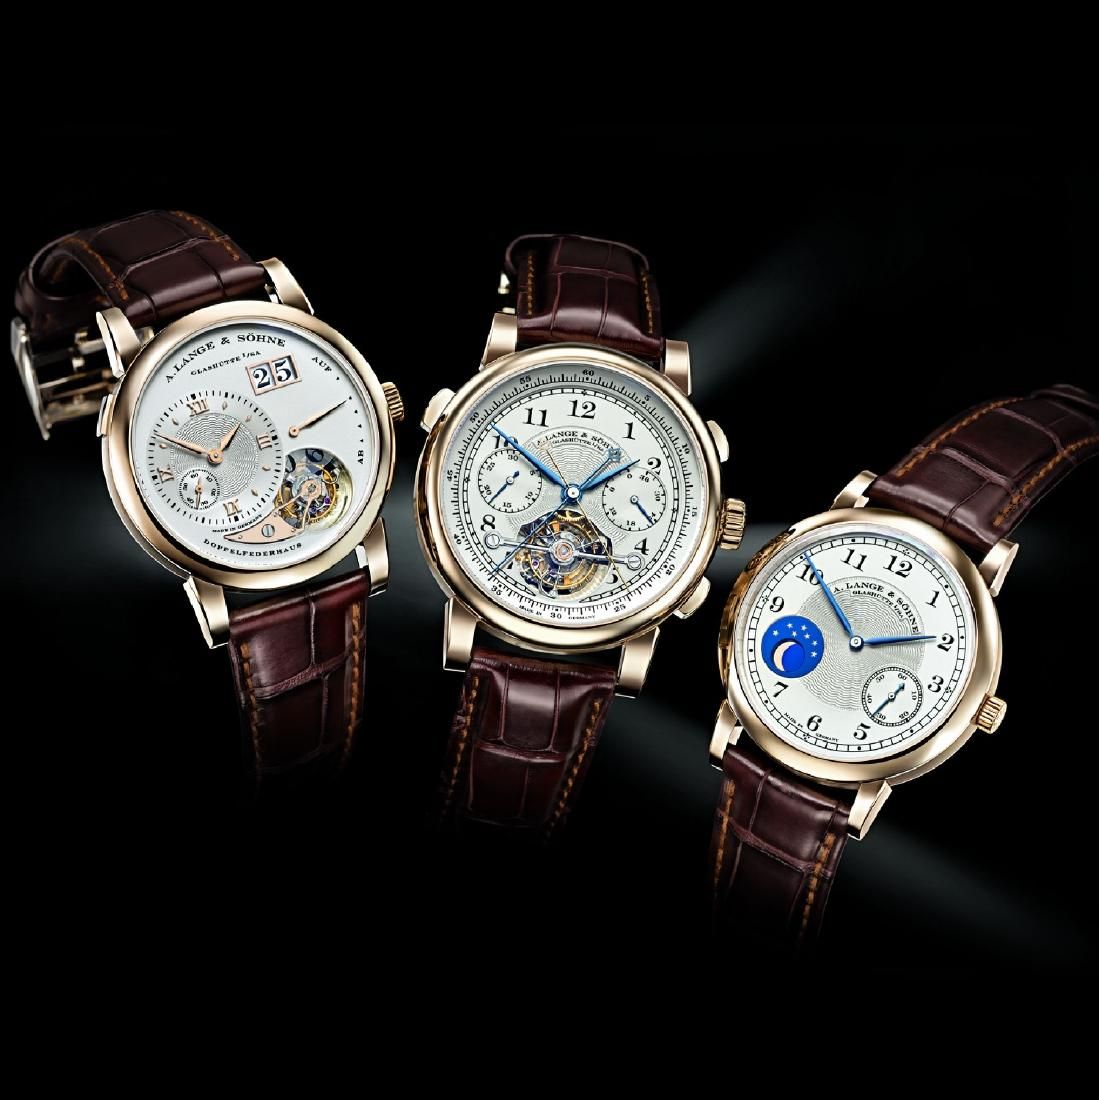 A trio of A. Lange & Söhne commemorative watches, collectively dubbed the ‘165 Years-Homage to F. A. Lange’ set, achieved €450,000 ($483,485) plus the buyer’s premium in October 2018. Image courtesy of Henry’s Auktionshaus AG and LiveAuctioneers.